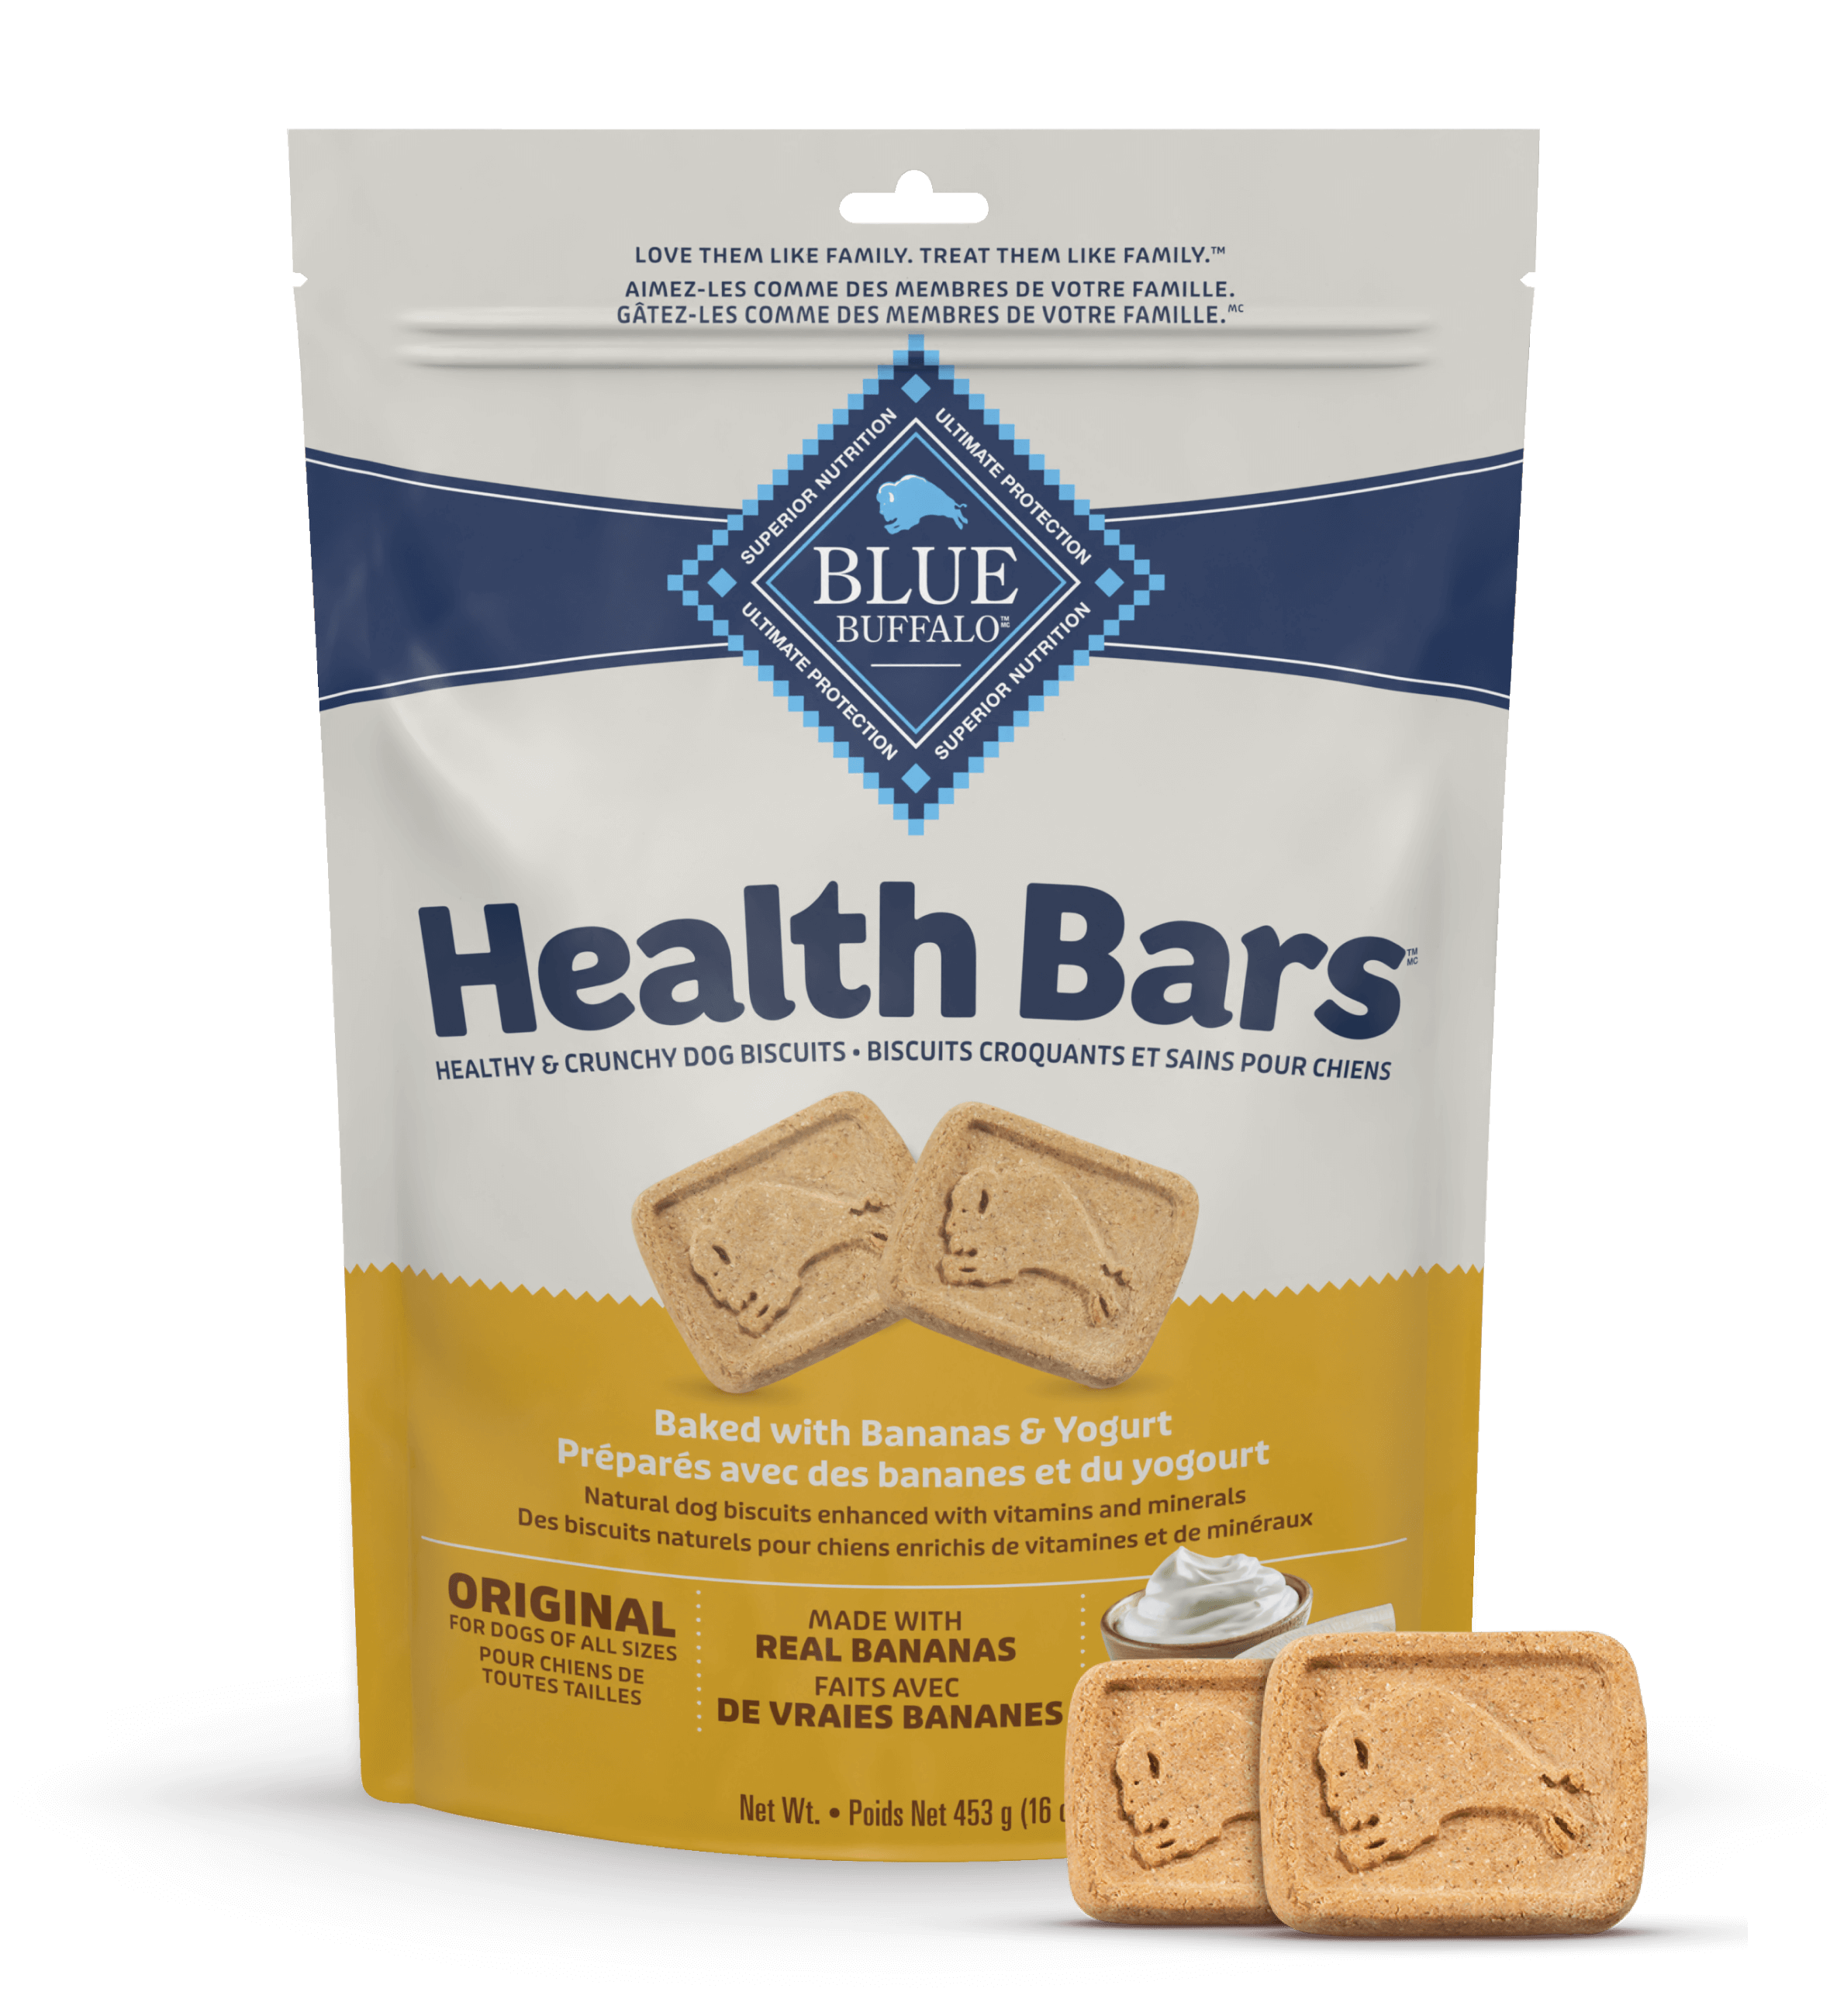 A package of Blue Buffalo Health Bars, baked dog treats with bananas and yogurt, suitable for all sizes of dogs.